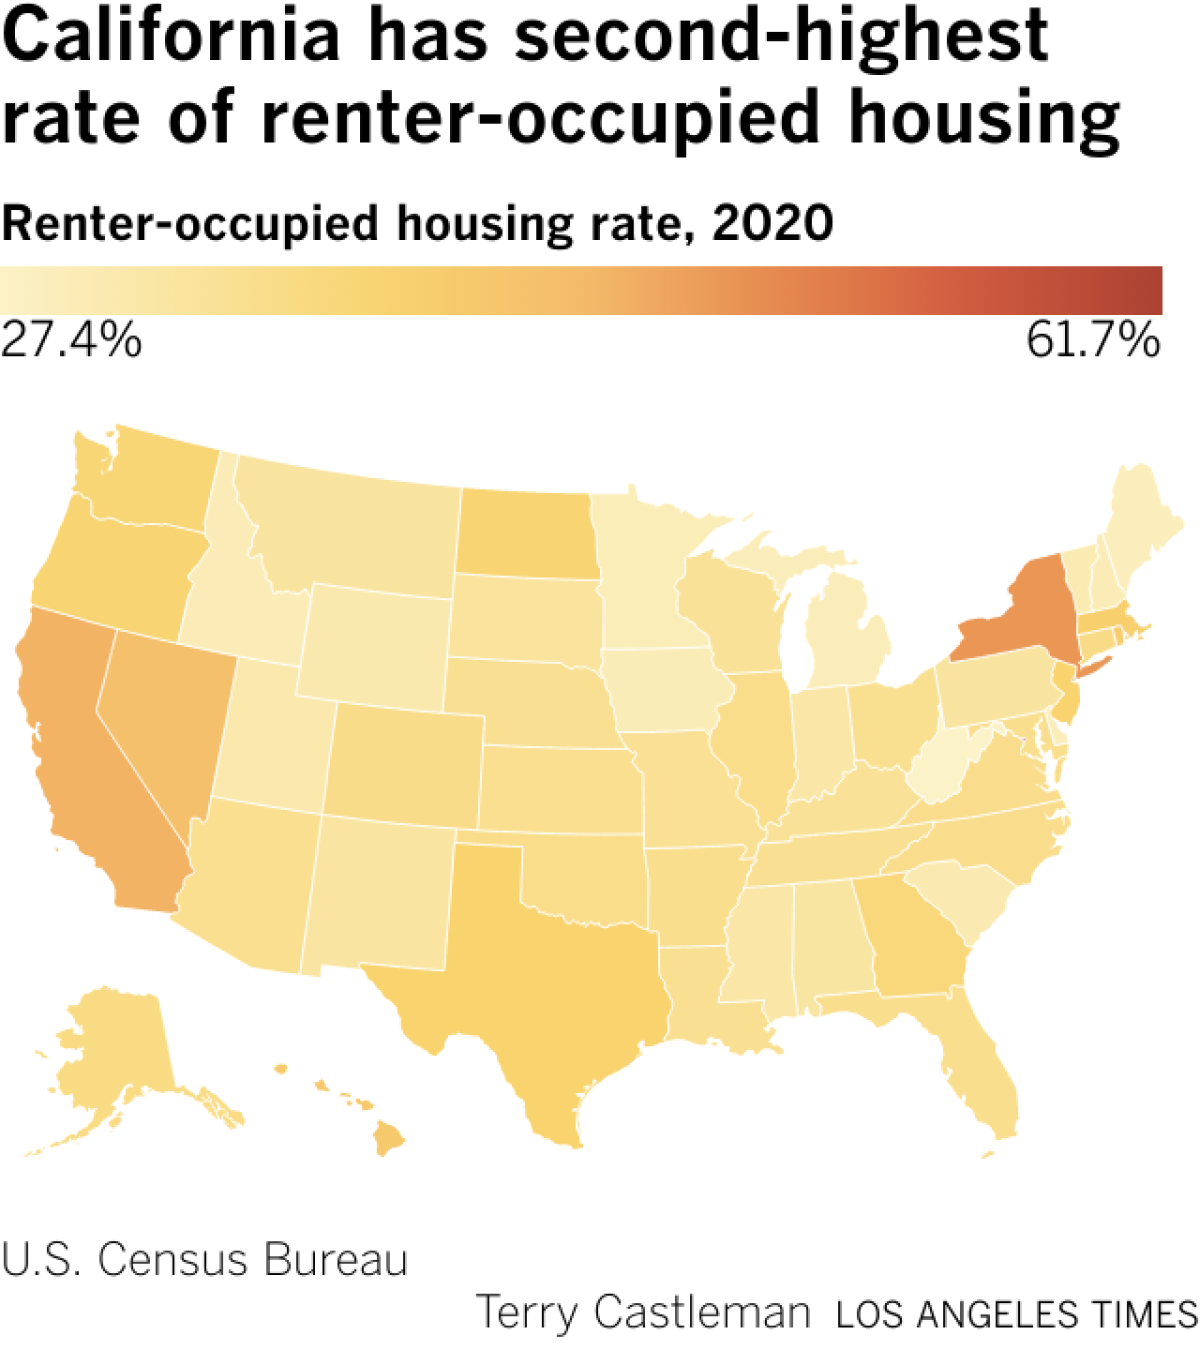 Map showing rental rates of every U.S. state in 2020.